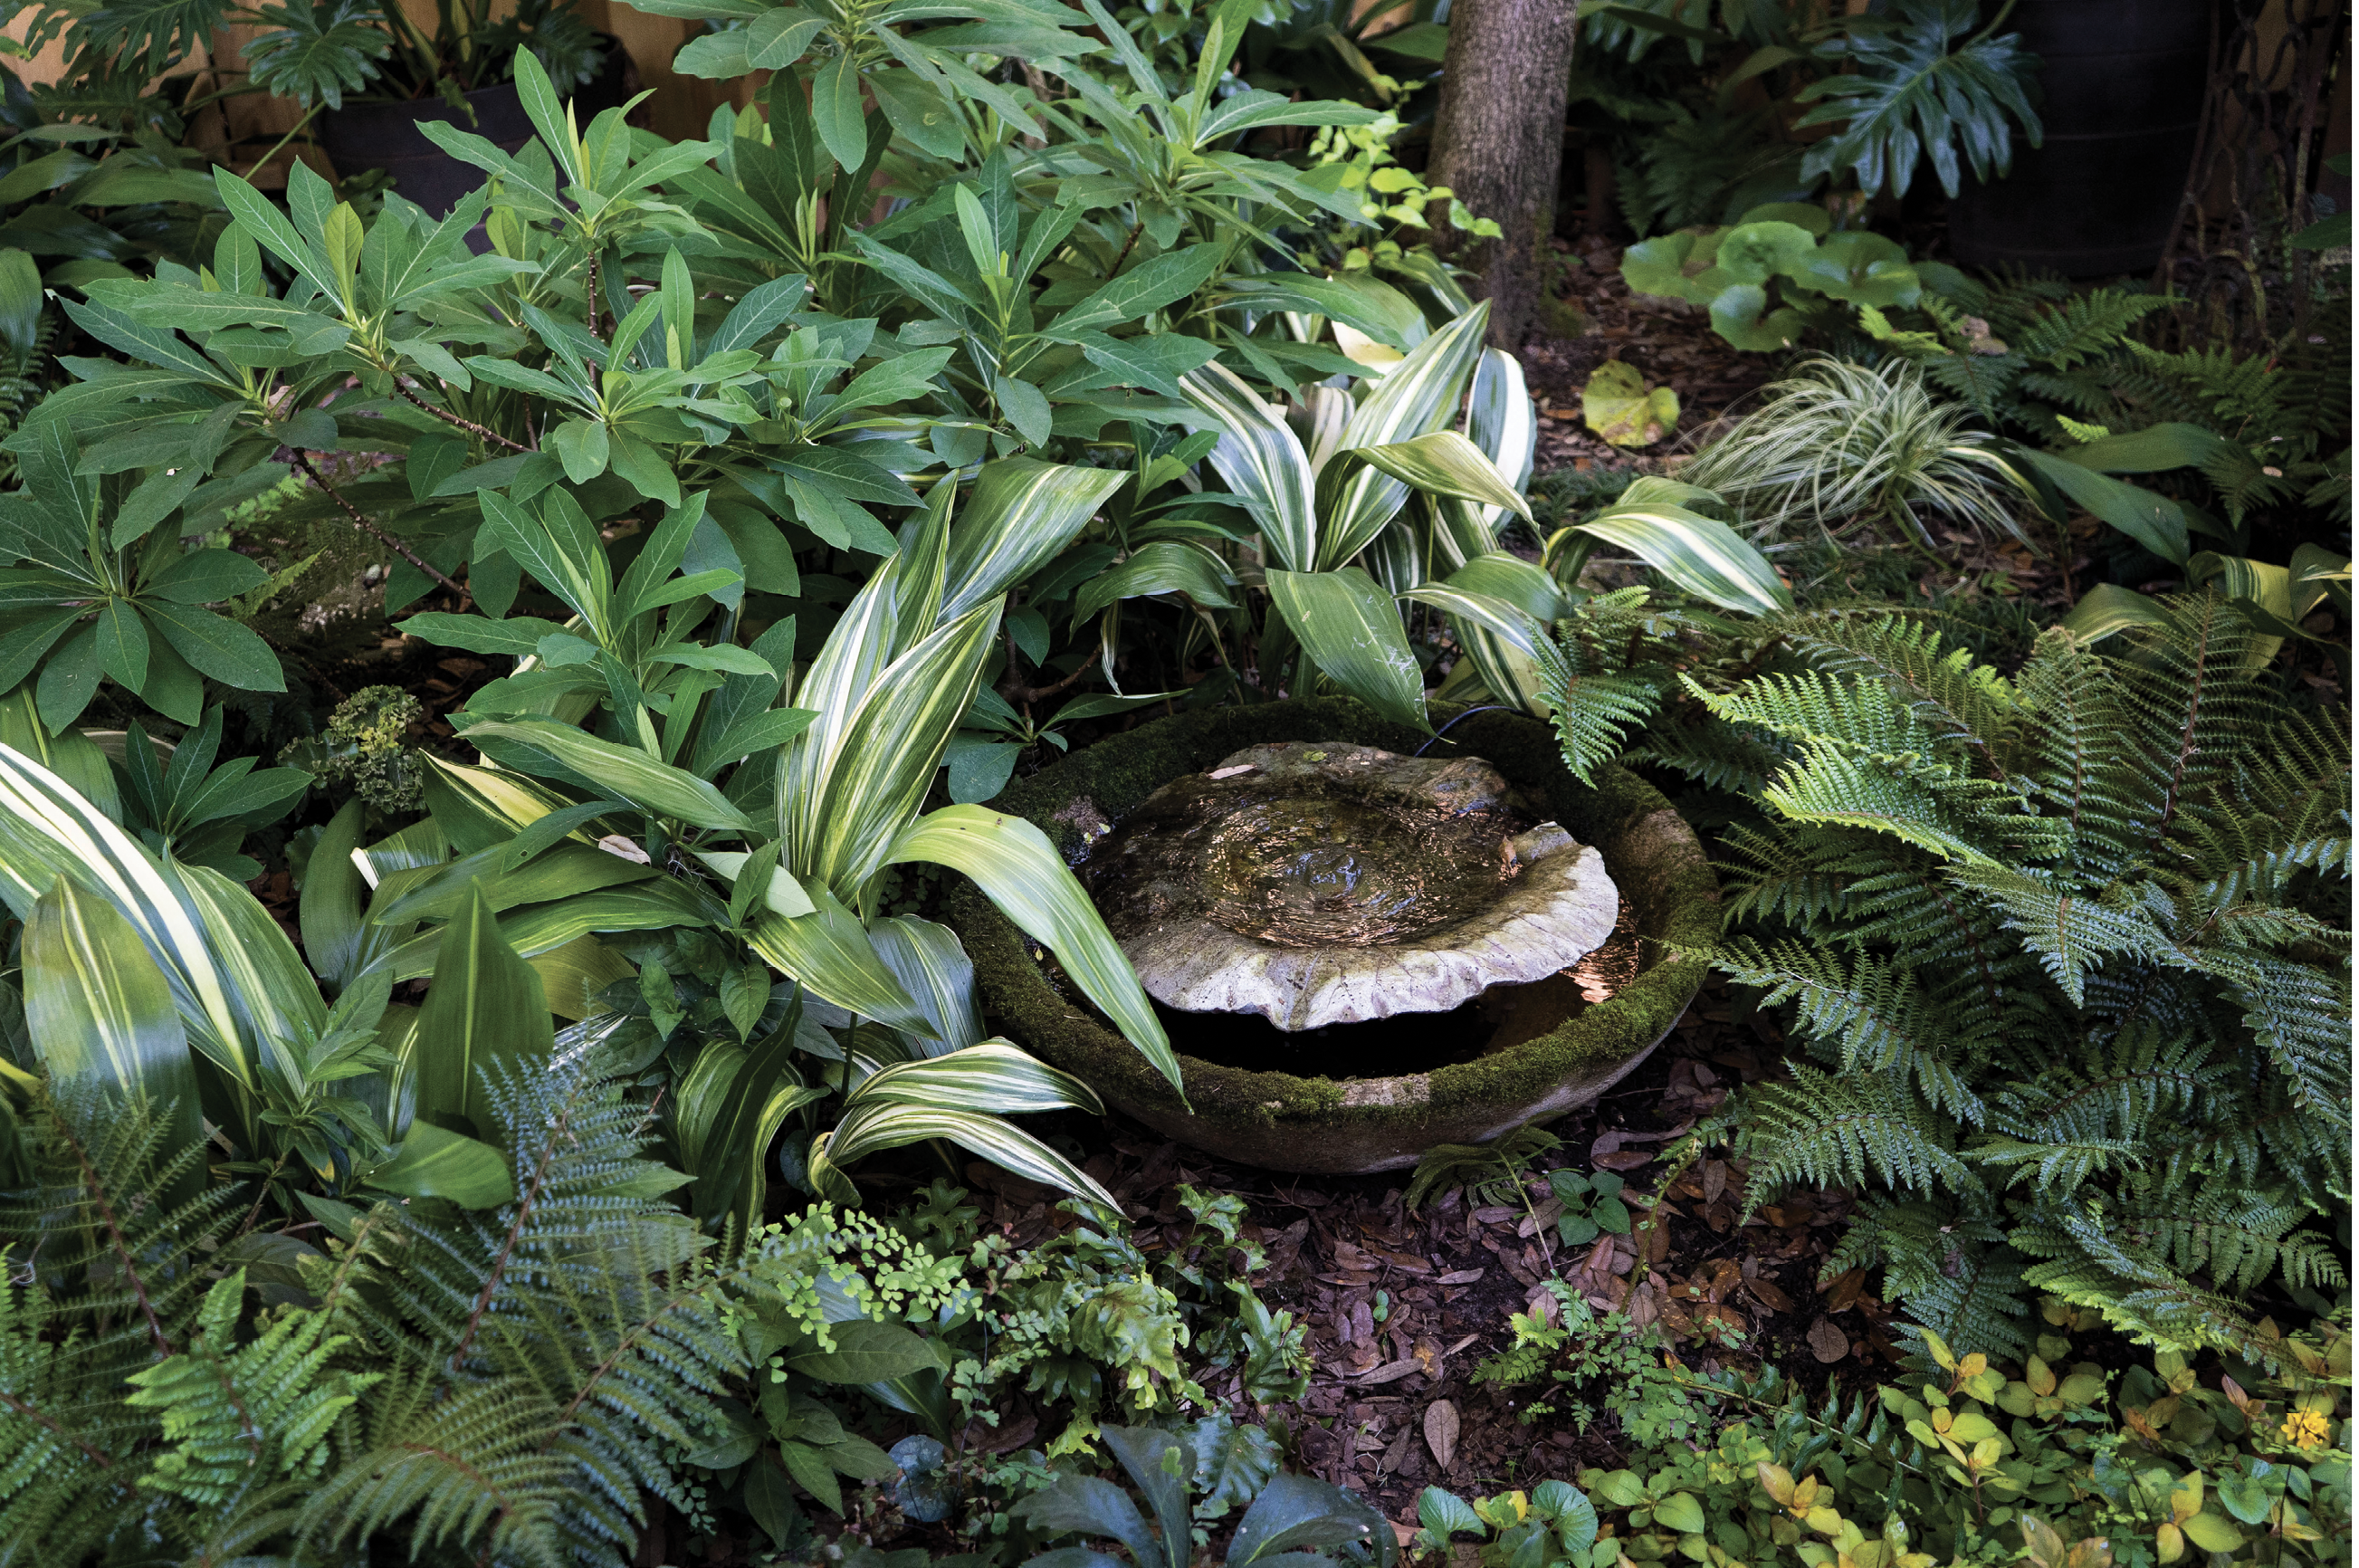 Cool &amp; Collected: ”In the long run, texture will give you more satisfaction in the garden than flowers ever will,” says Rivers of her propensity for mingling plants with contrasting forms and leaf shapes. Here, she highlights a moss-frosted fountain with an array that includes edgeworthia—a four-season stunner—variegated cast iron plants, and Southern maidenhair and tassel ferns. “Maidenhair is one of the prettiest ferns to blend with just about anything because it’s so delicate,” says Rivers. “It drops spores that always seem to sprout up in places that surprise and delight. I find myself saying, ’Okay, I didn’t even think about putting you there, but that’s a great spot—I’m glad you found it!‘”